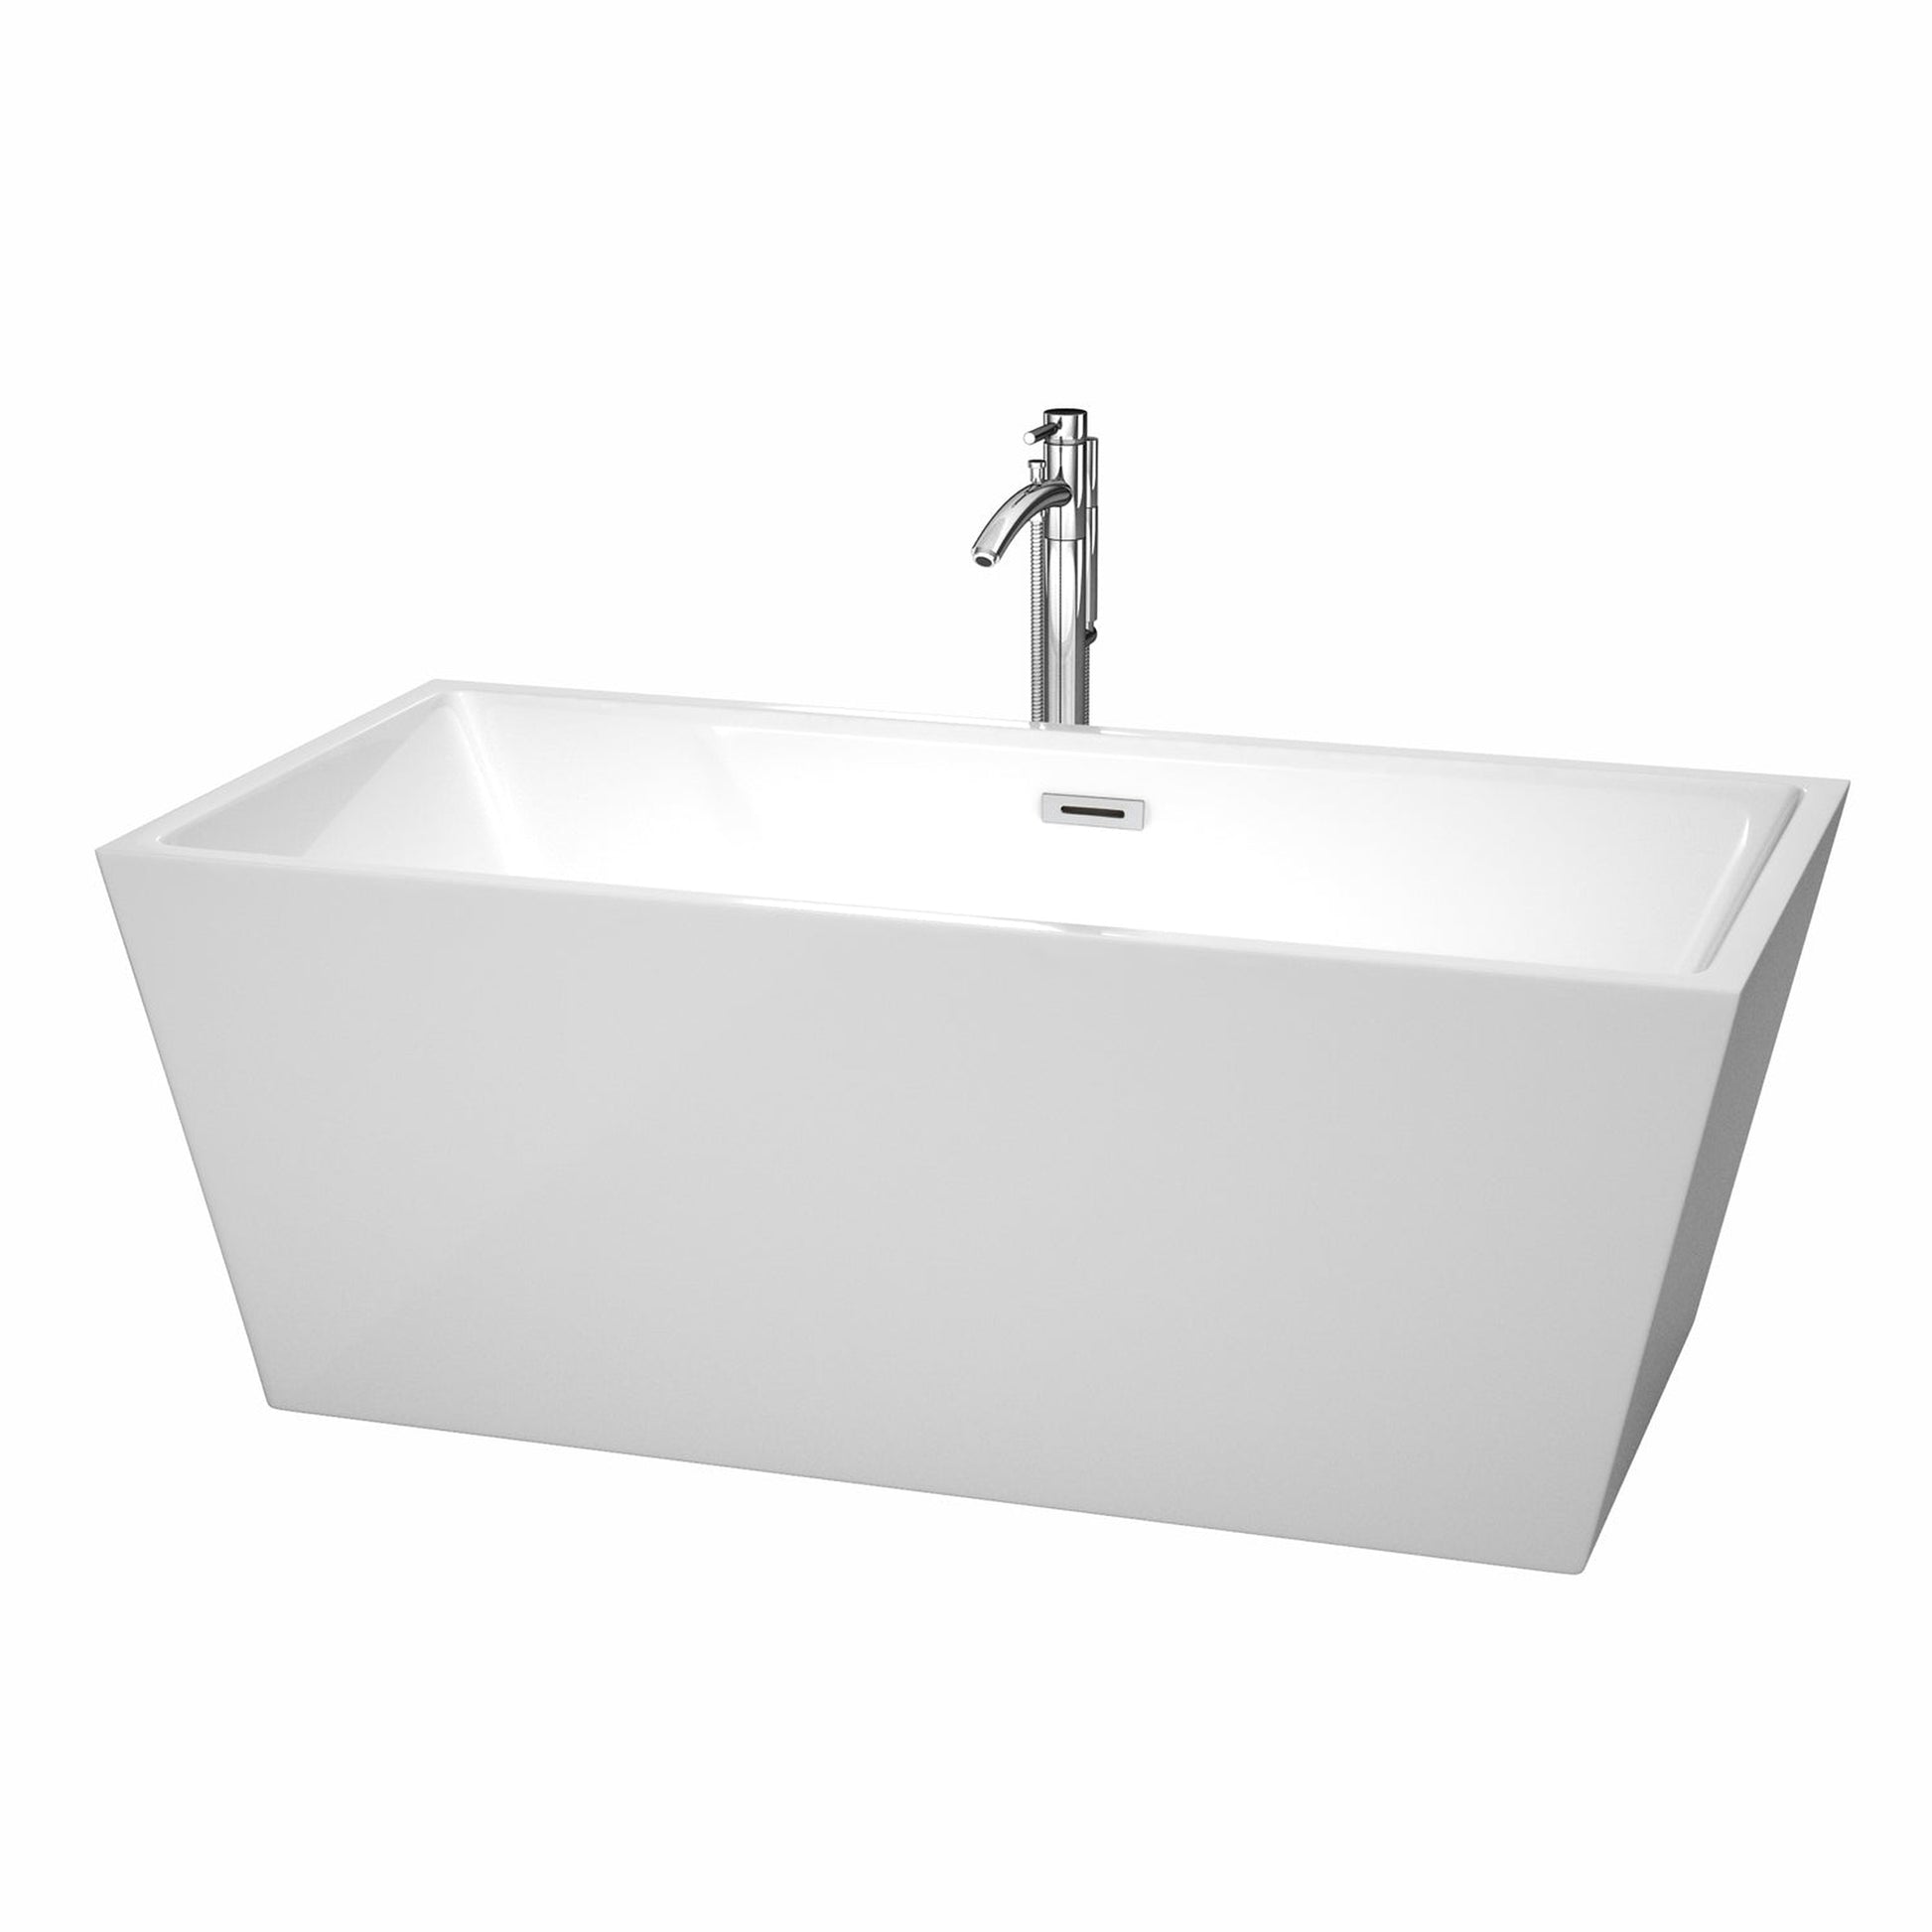 Wyndham Collection Sara 63" Freestanding Bathtub in White With Floor Mounted Faucet, Drain and Overflow Trim in Polished Chrome